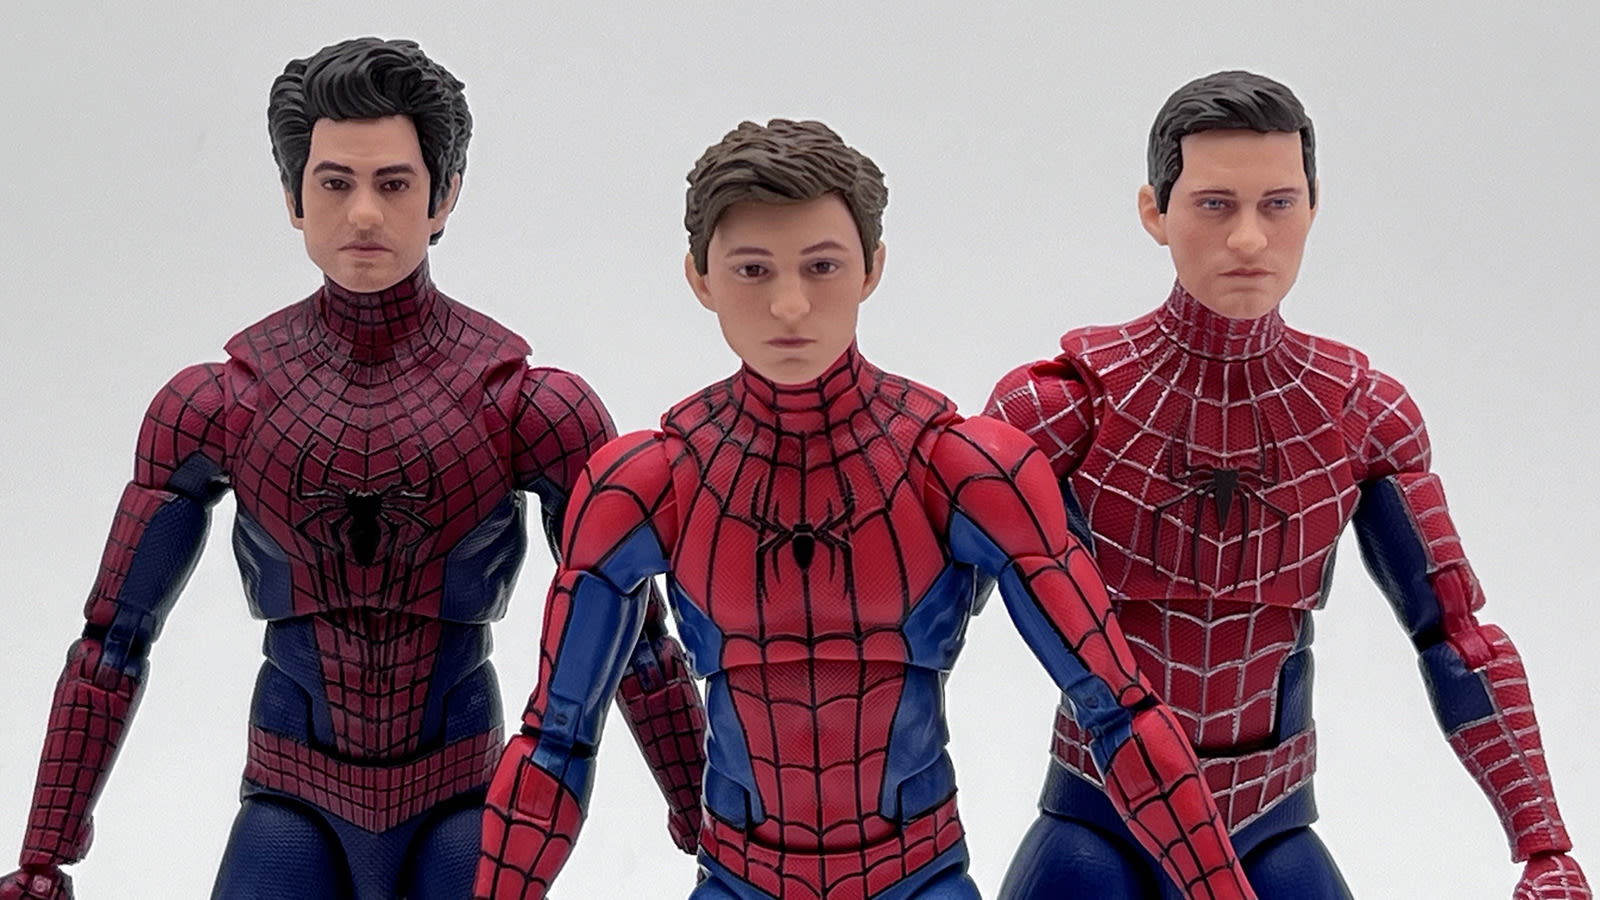 Hasbro's Marvel Legends Spider-Man: No Way Home Action Figure Line Is Almost Perfect - SlashFilm